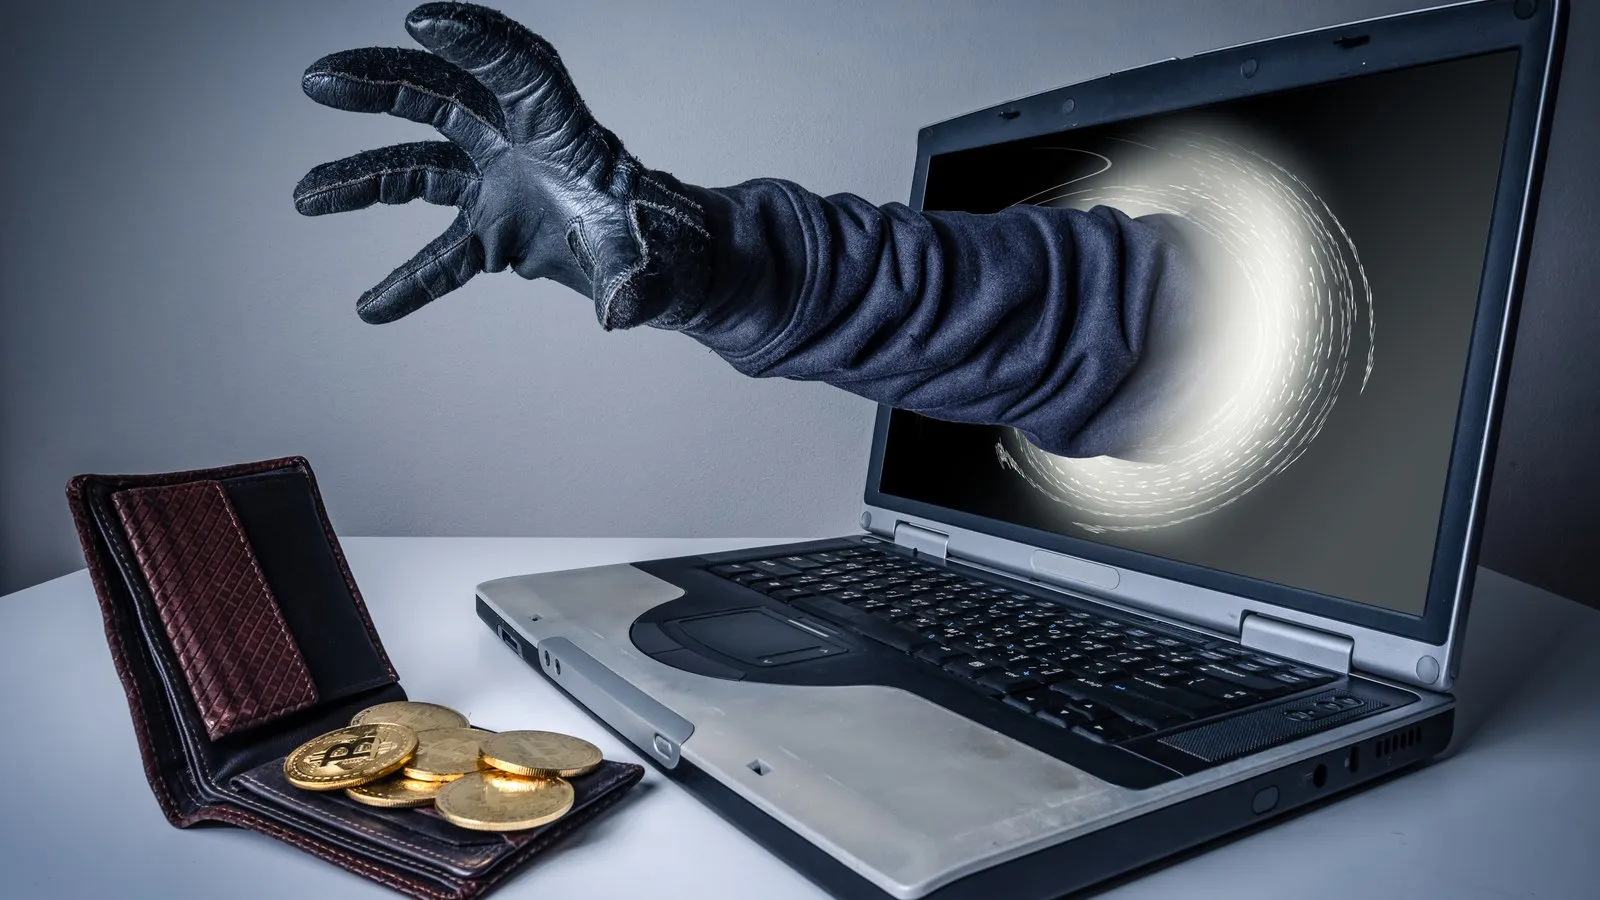 Hacks and exploits are common in the crypto world. Image: Shutterstock